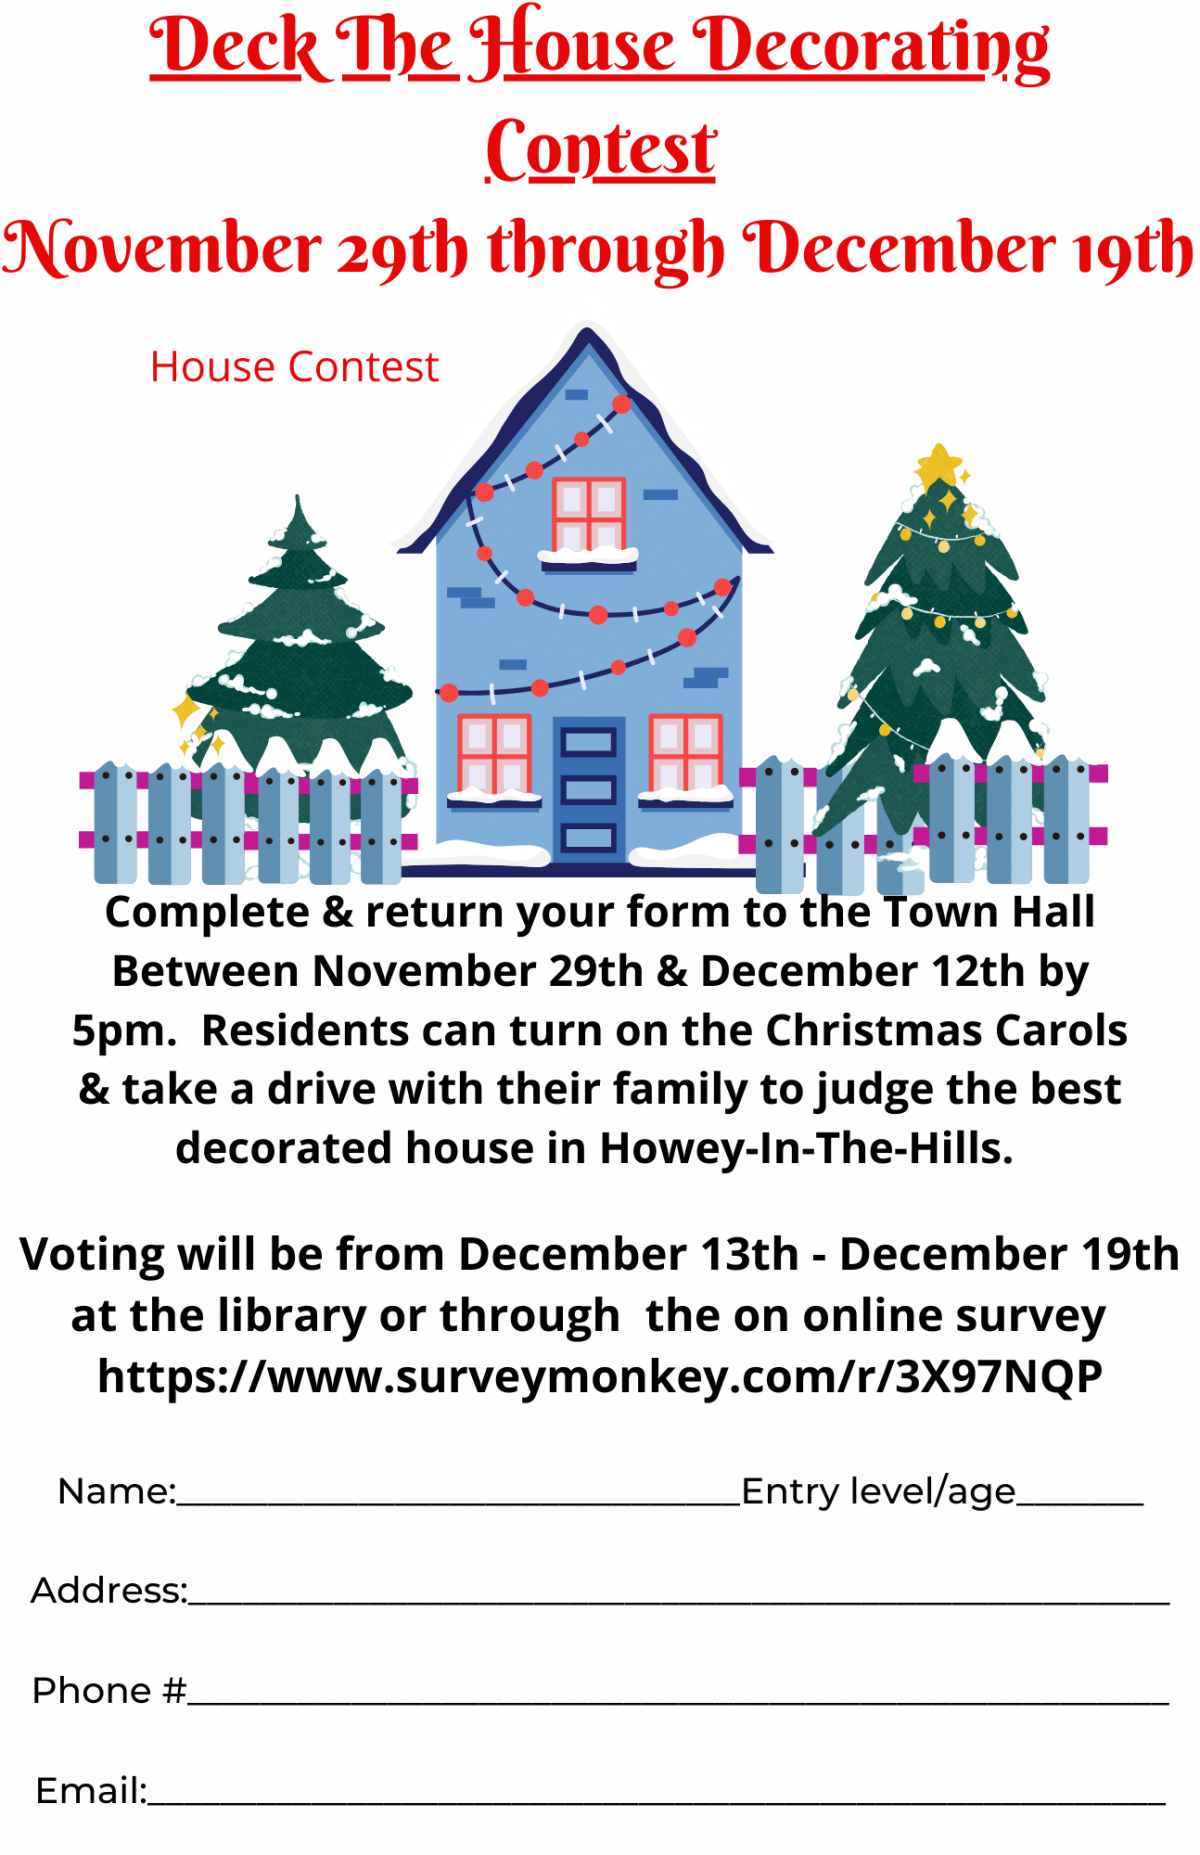 Deck the House Decorating Contest - Last Chance to Vote